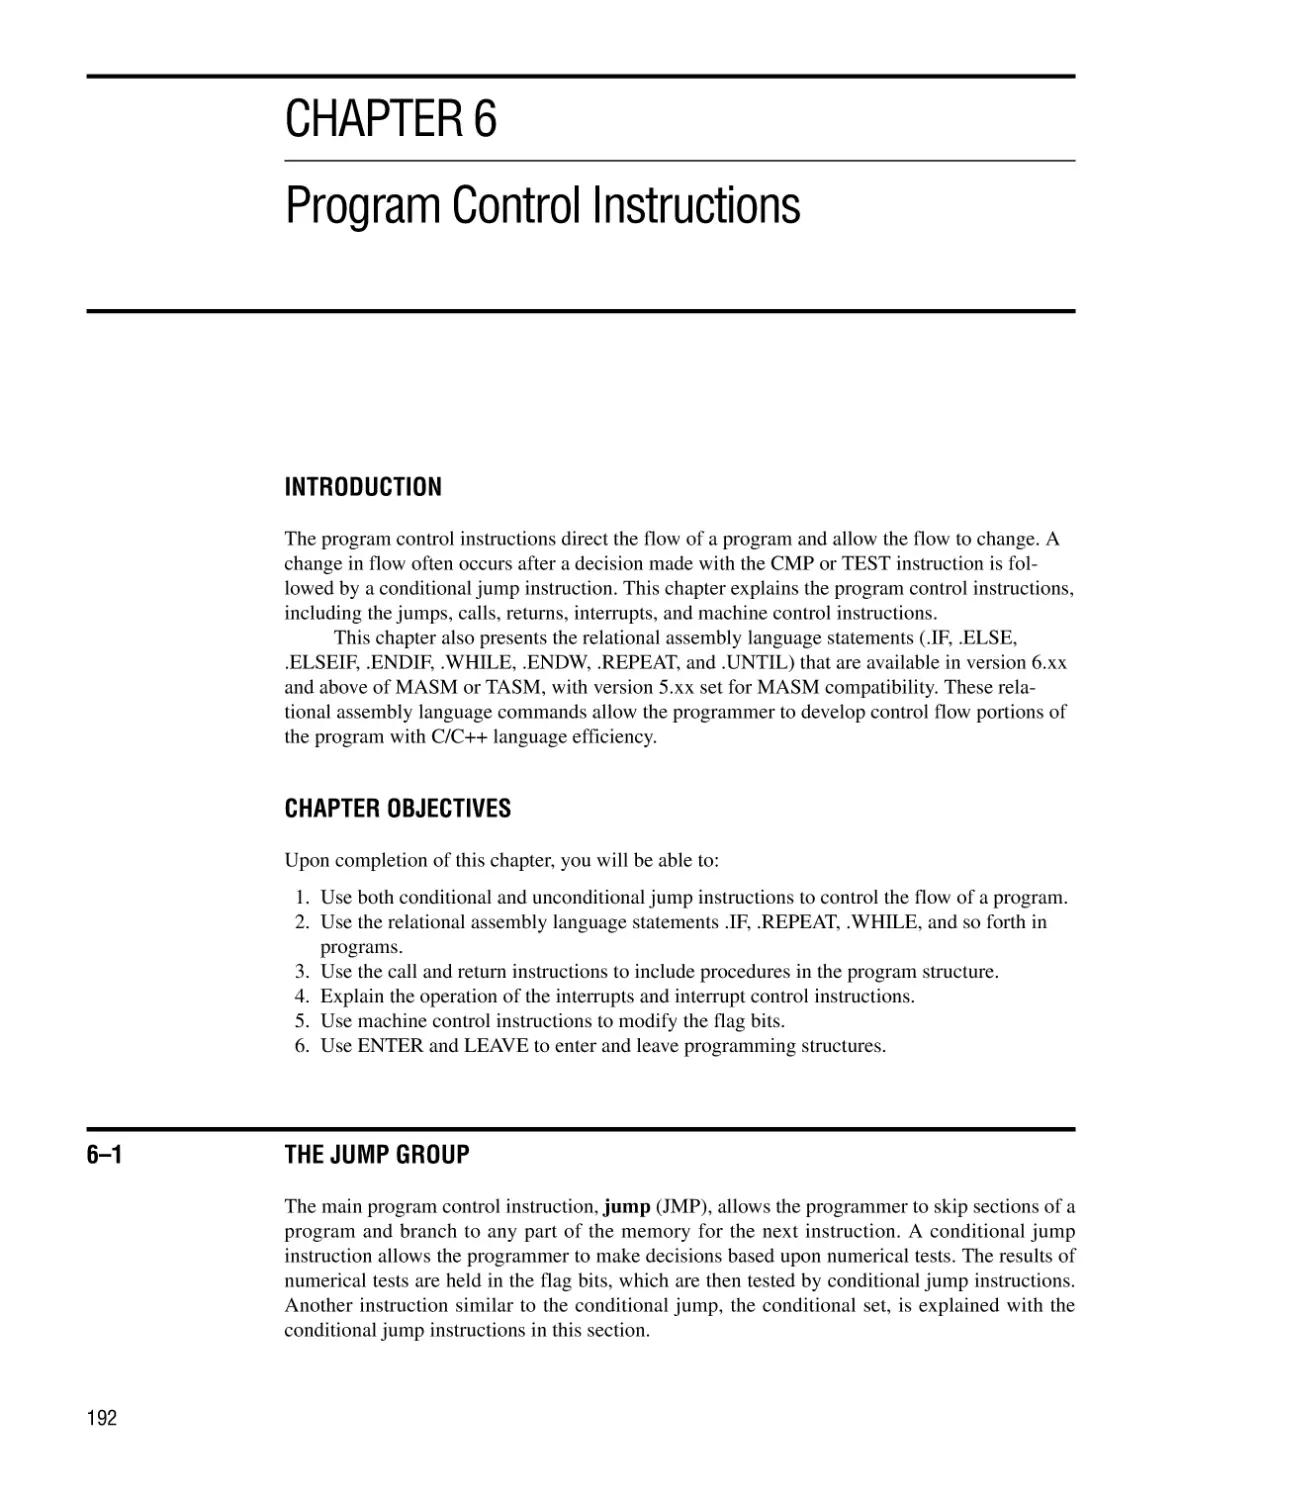 CHAPTER 6 PROGRAM CONTROL INSTRUCTIONS
Introduction/Chapter Objectives
6–1 The Jump Group